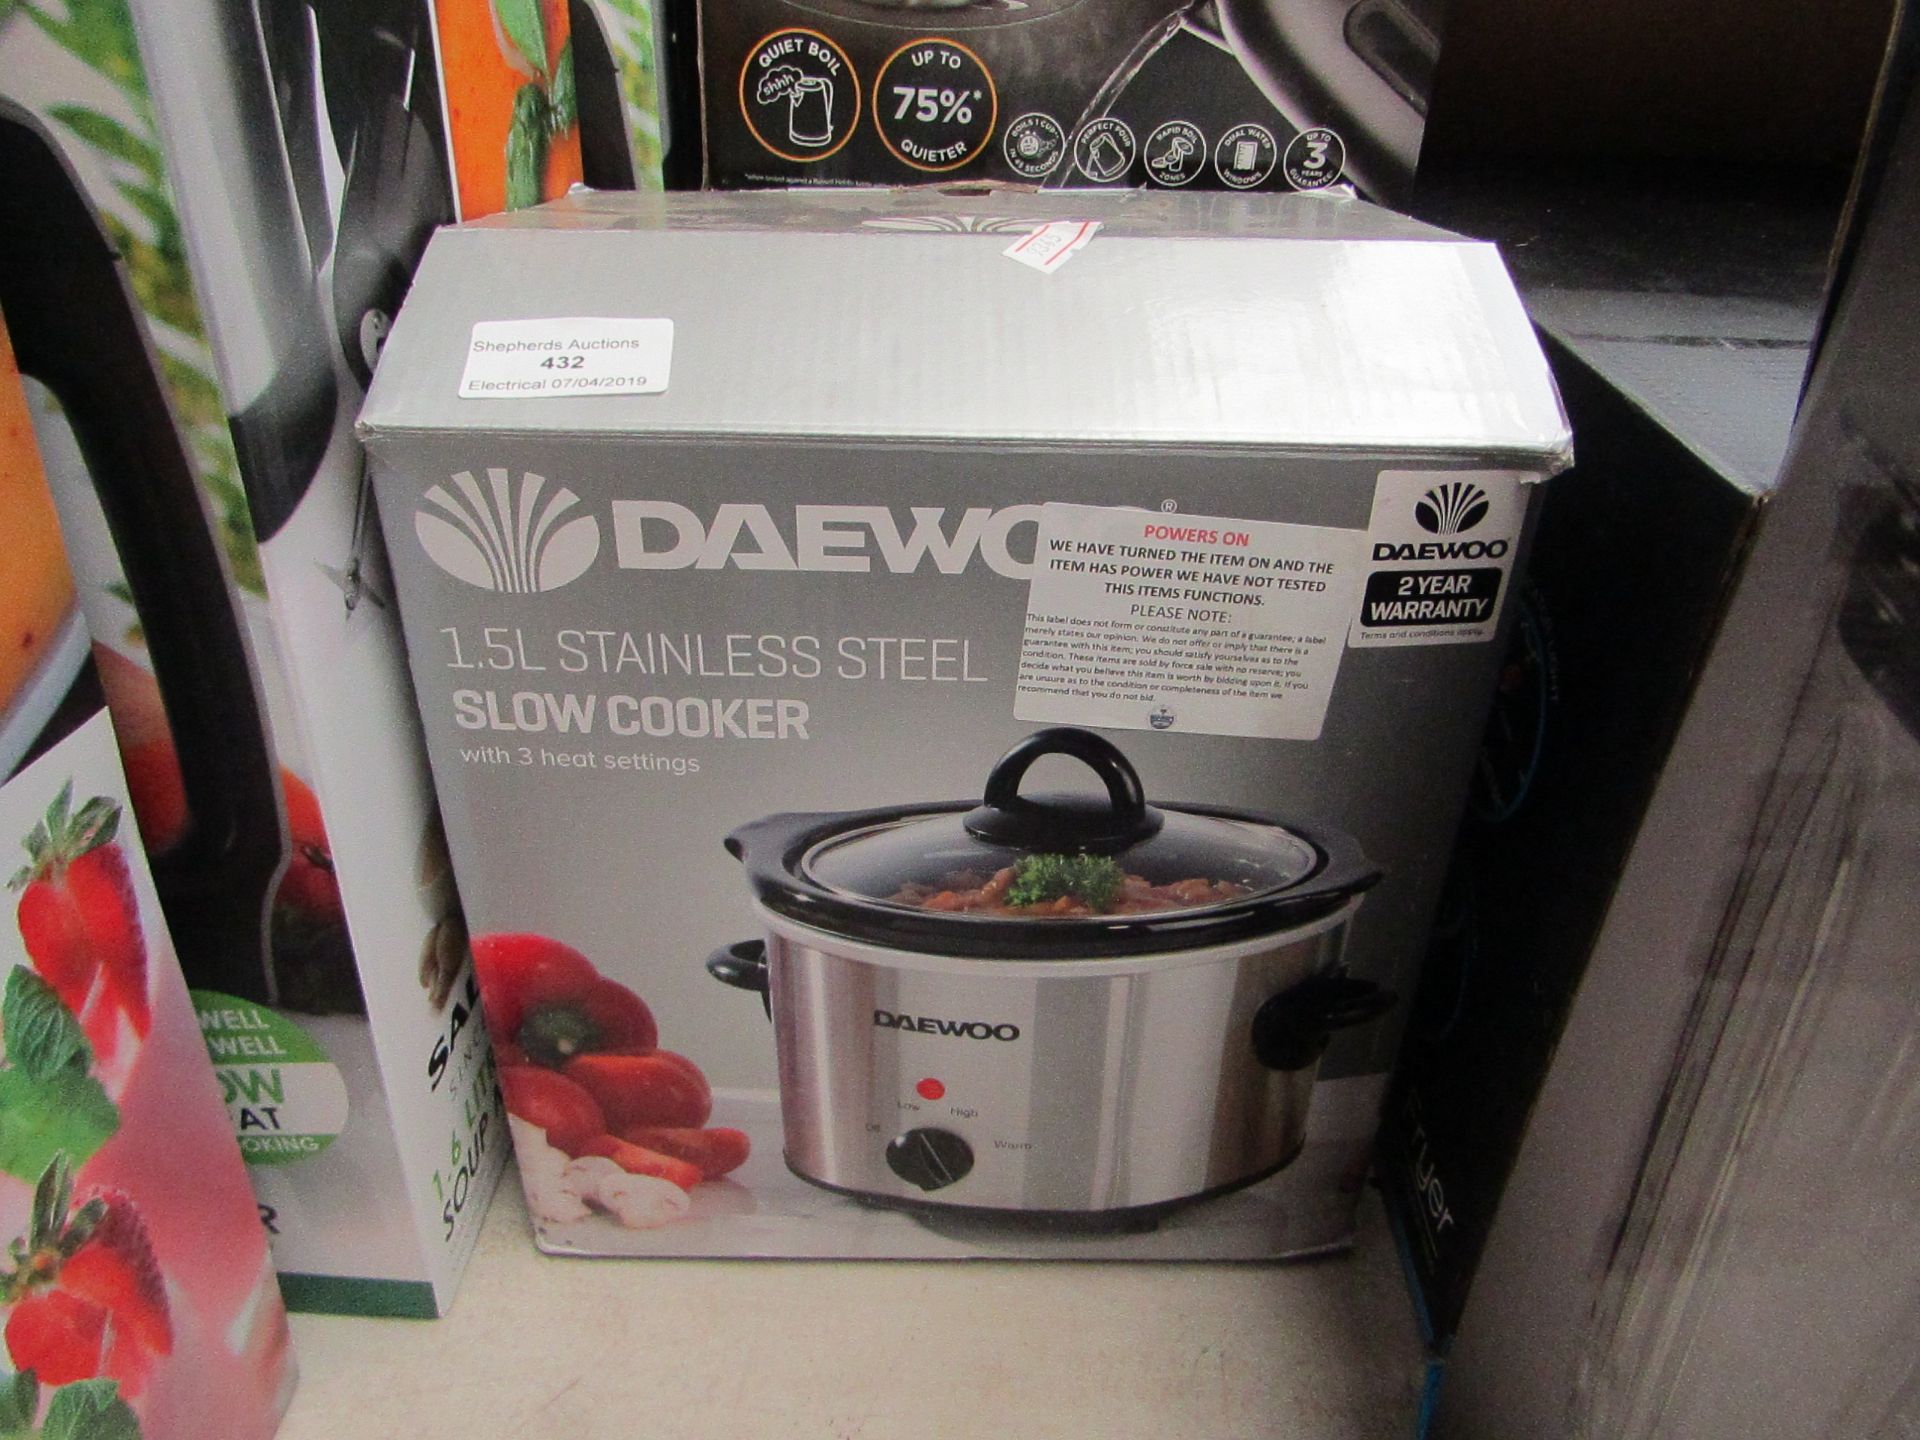 deawoo slow cooker powers on and boxed